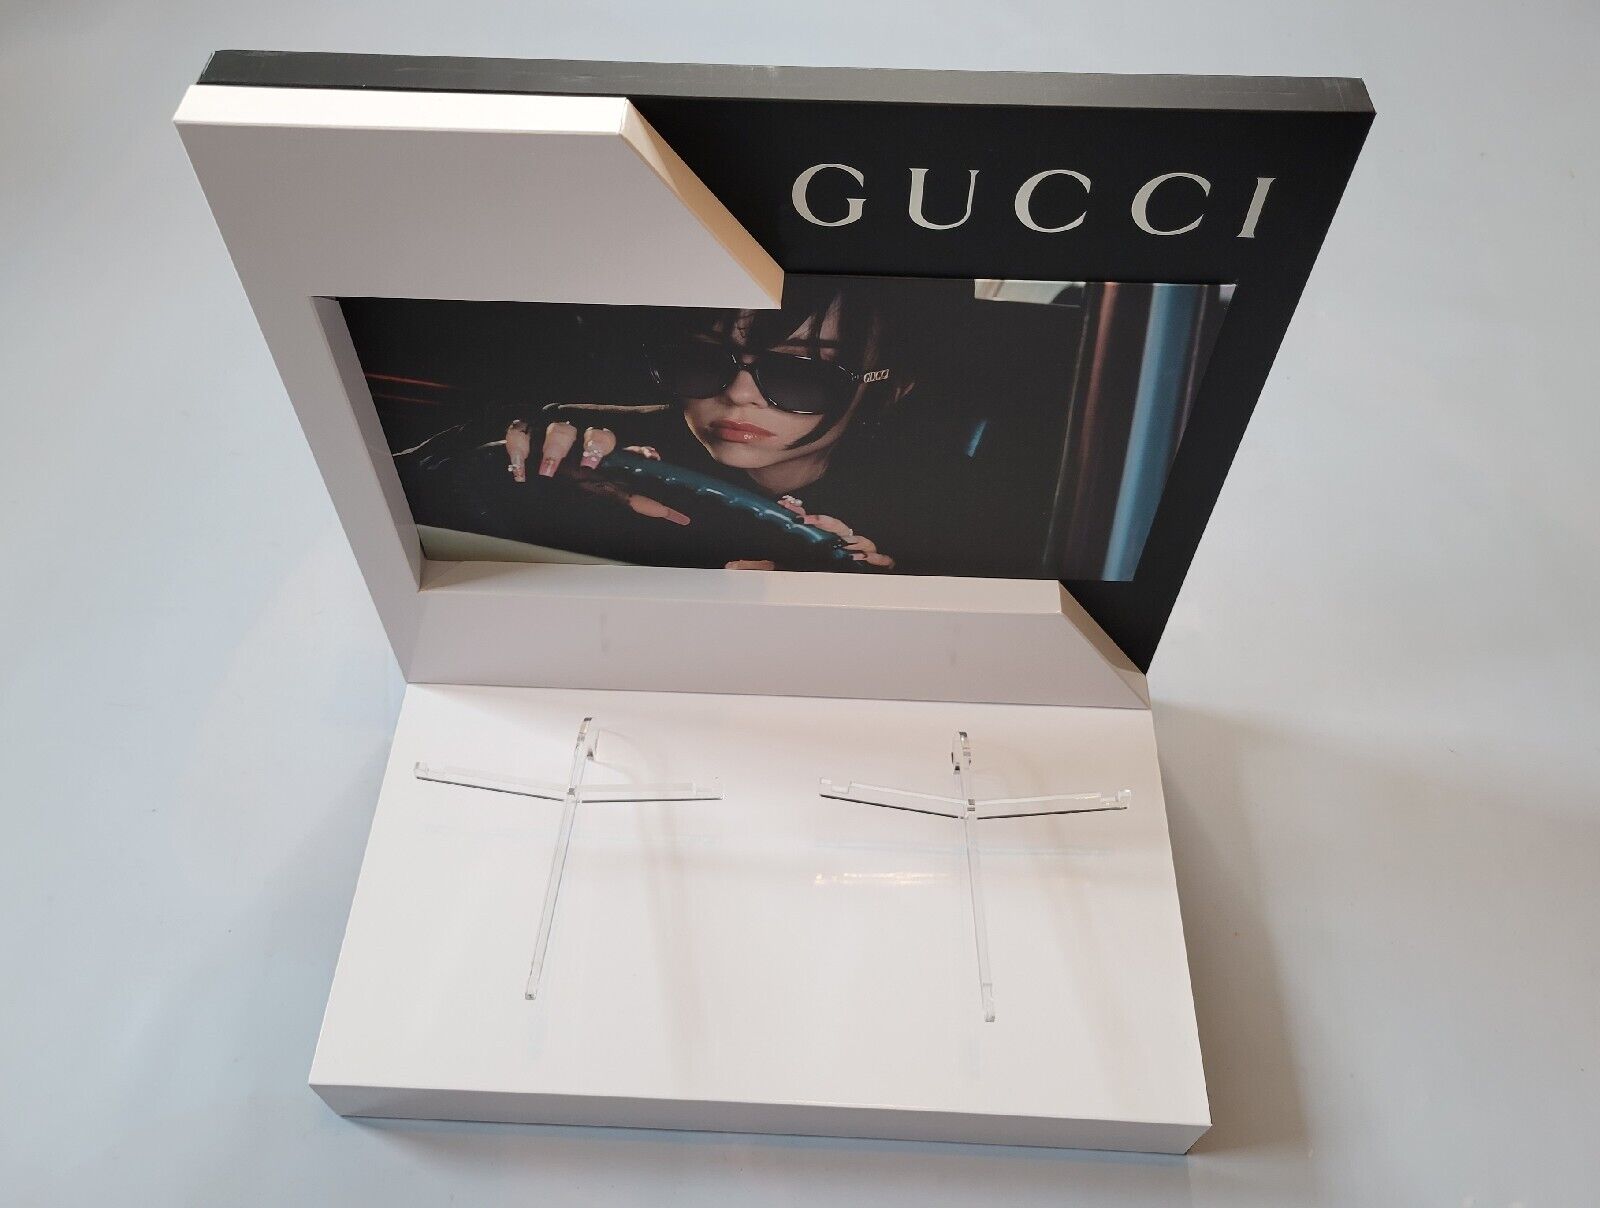 GUCCI TWO PIECE LOGO DISPLAY UNIT IN MULTI-COLOR CARDBOARD MADE IN ITALY